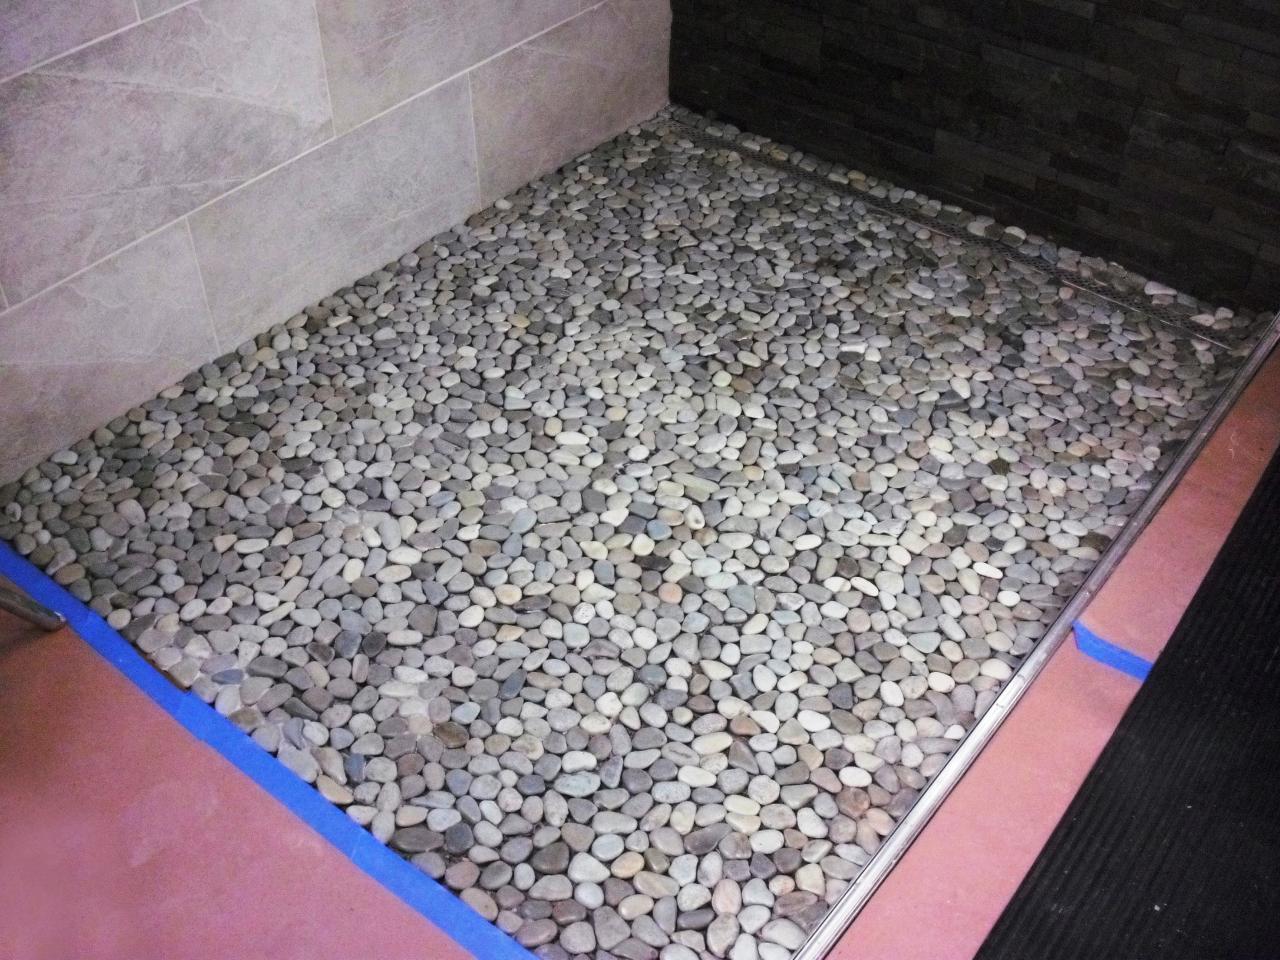 How To Lay A Pebble Tile Floor, How To Make A Pebble Shower Floor